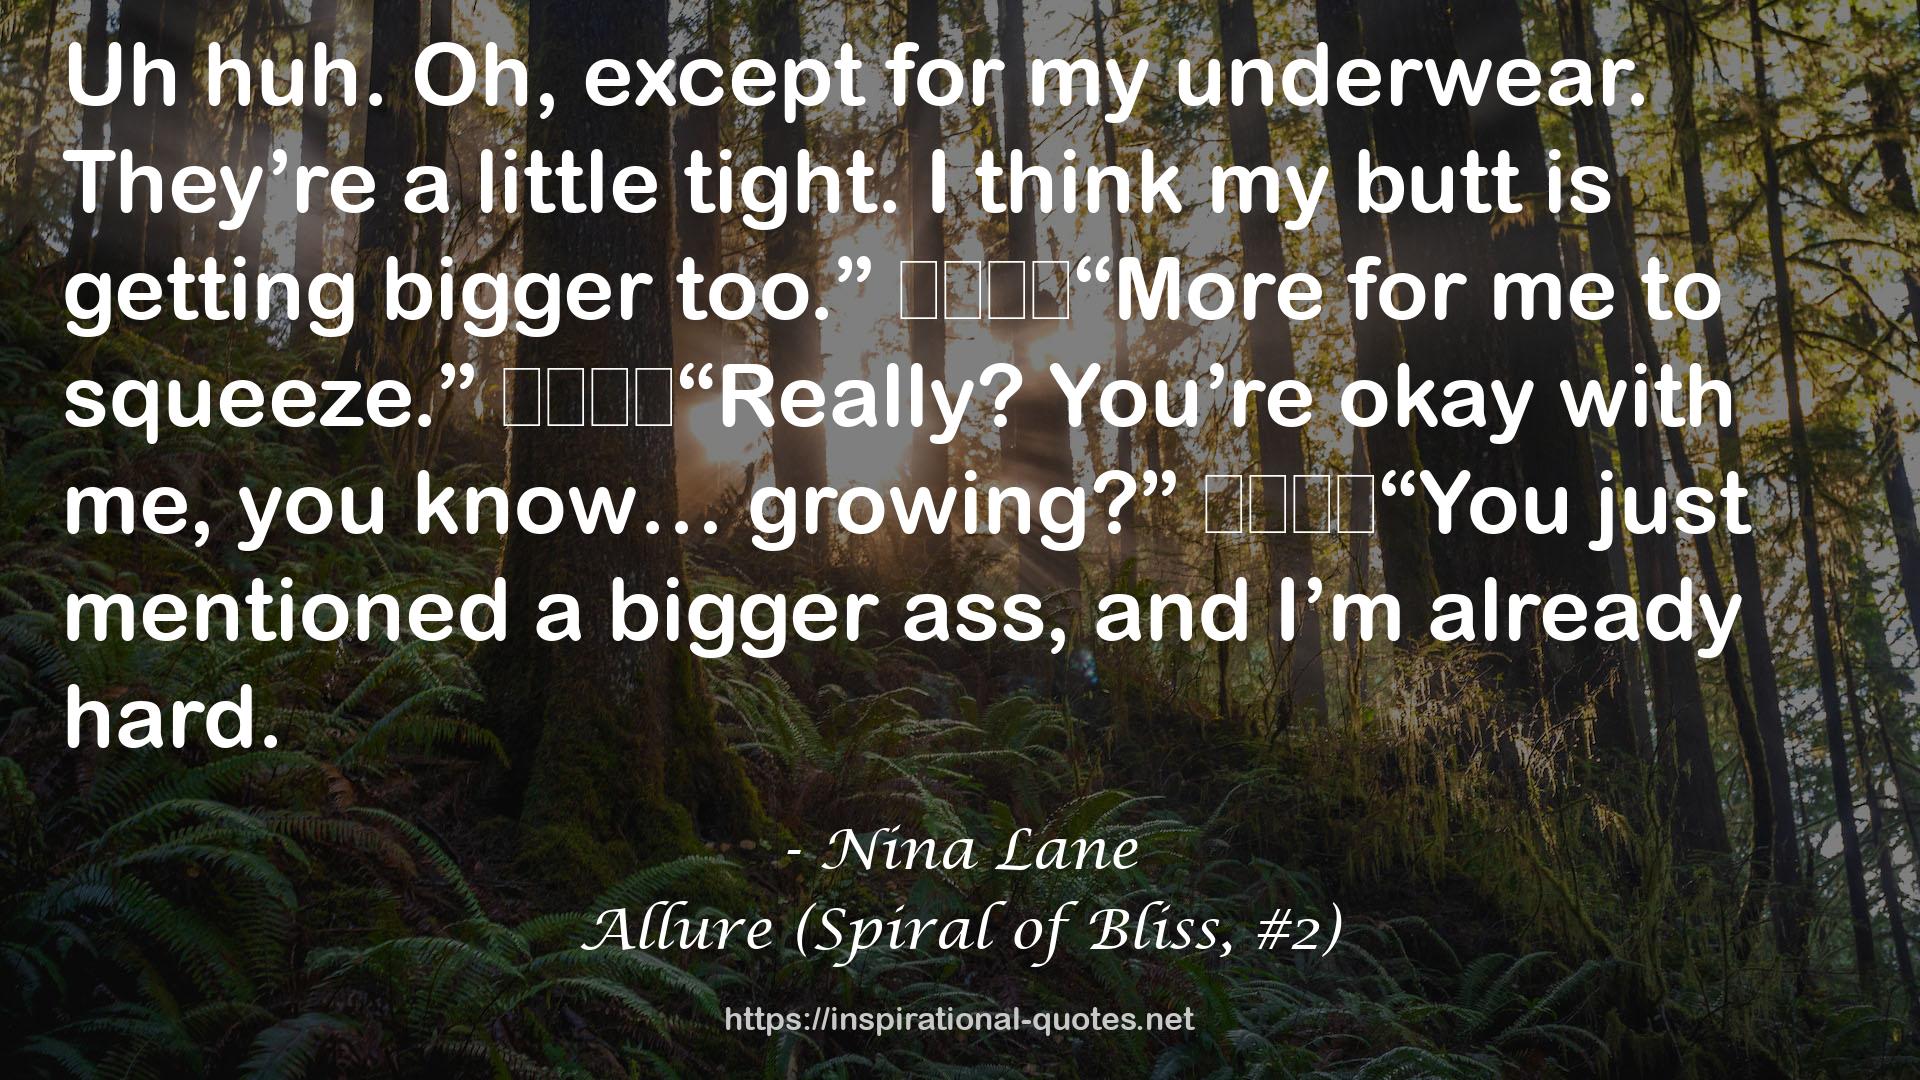 Allure (Spiral of Bliss, #2) QUOTES